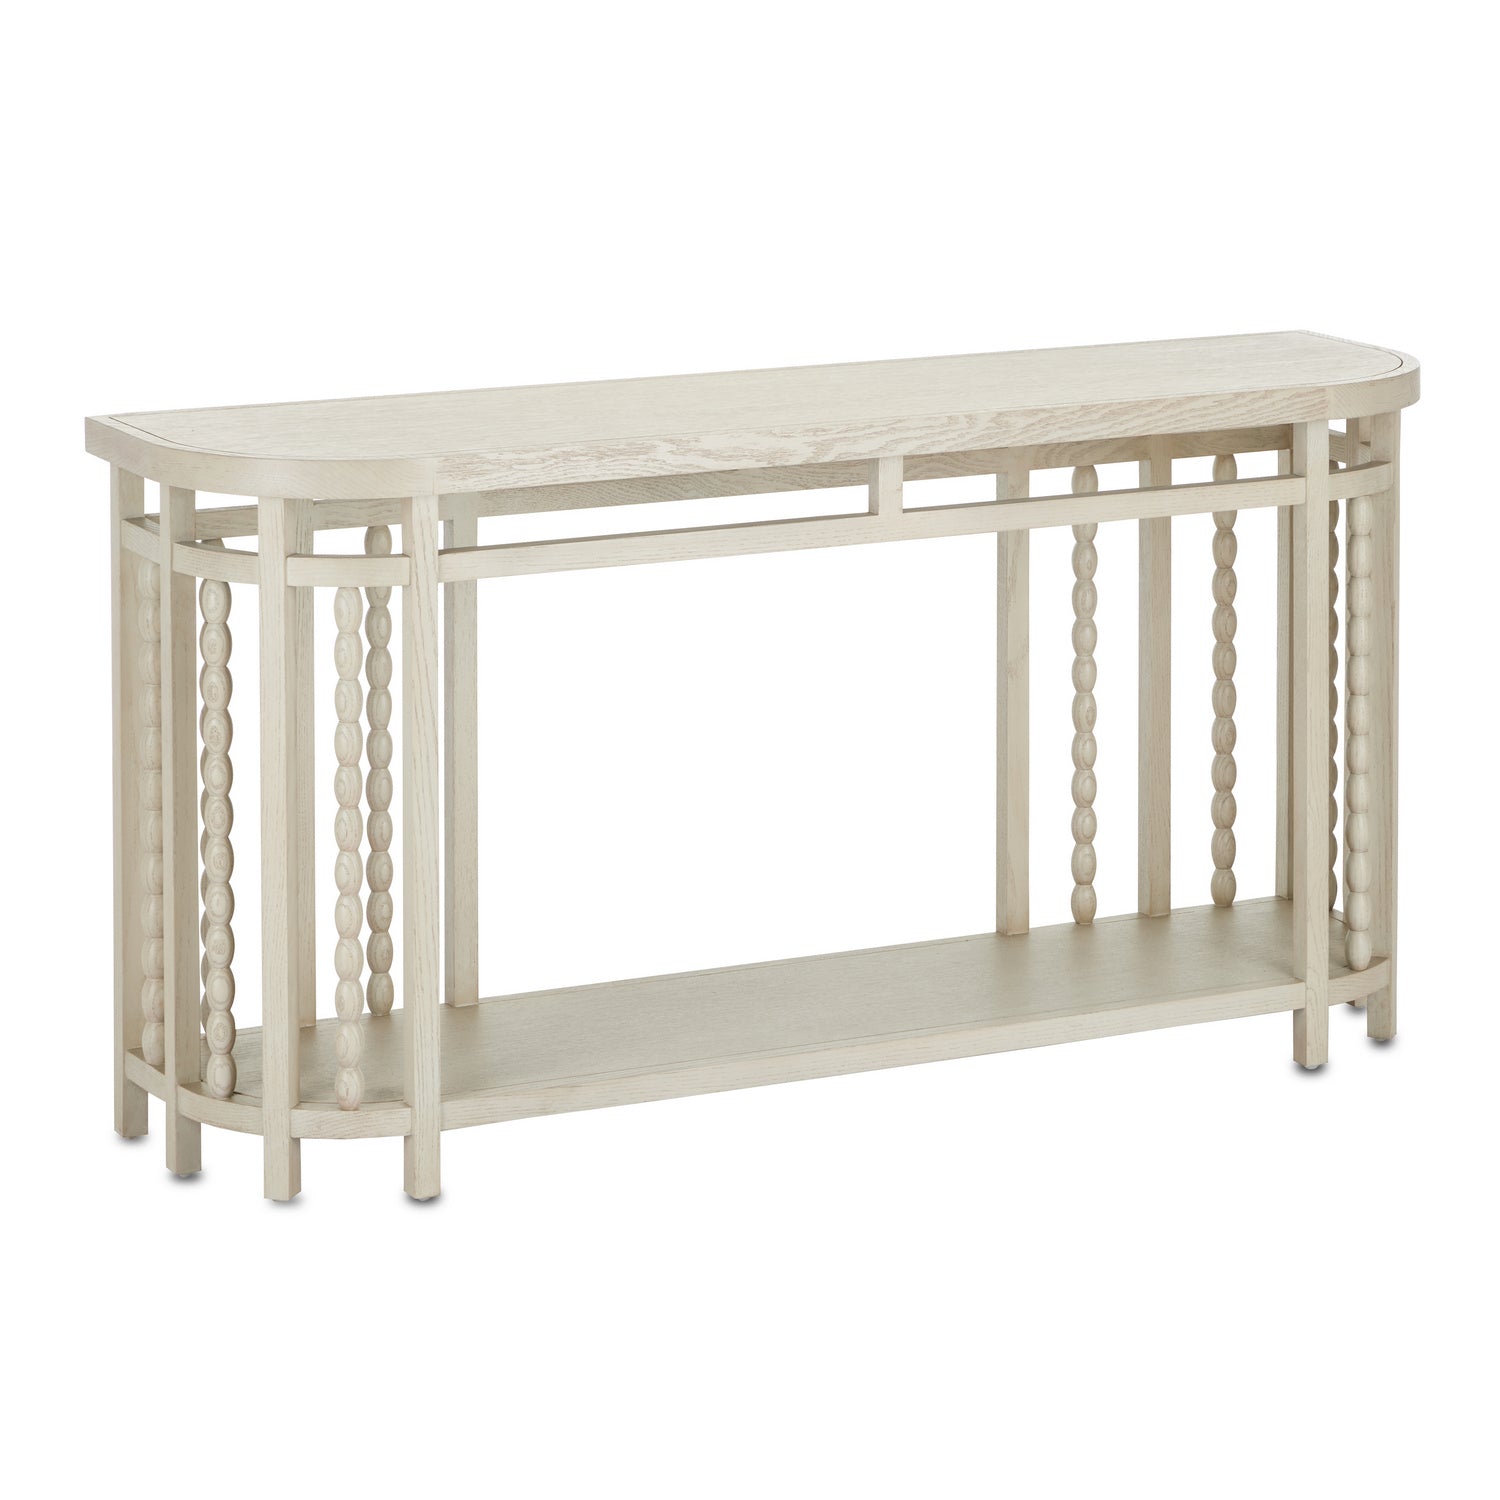 Console Table from the Norene collection in Fog Gray finish